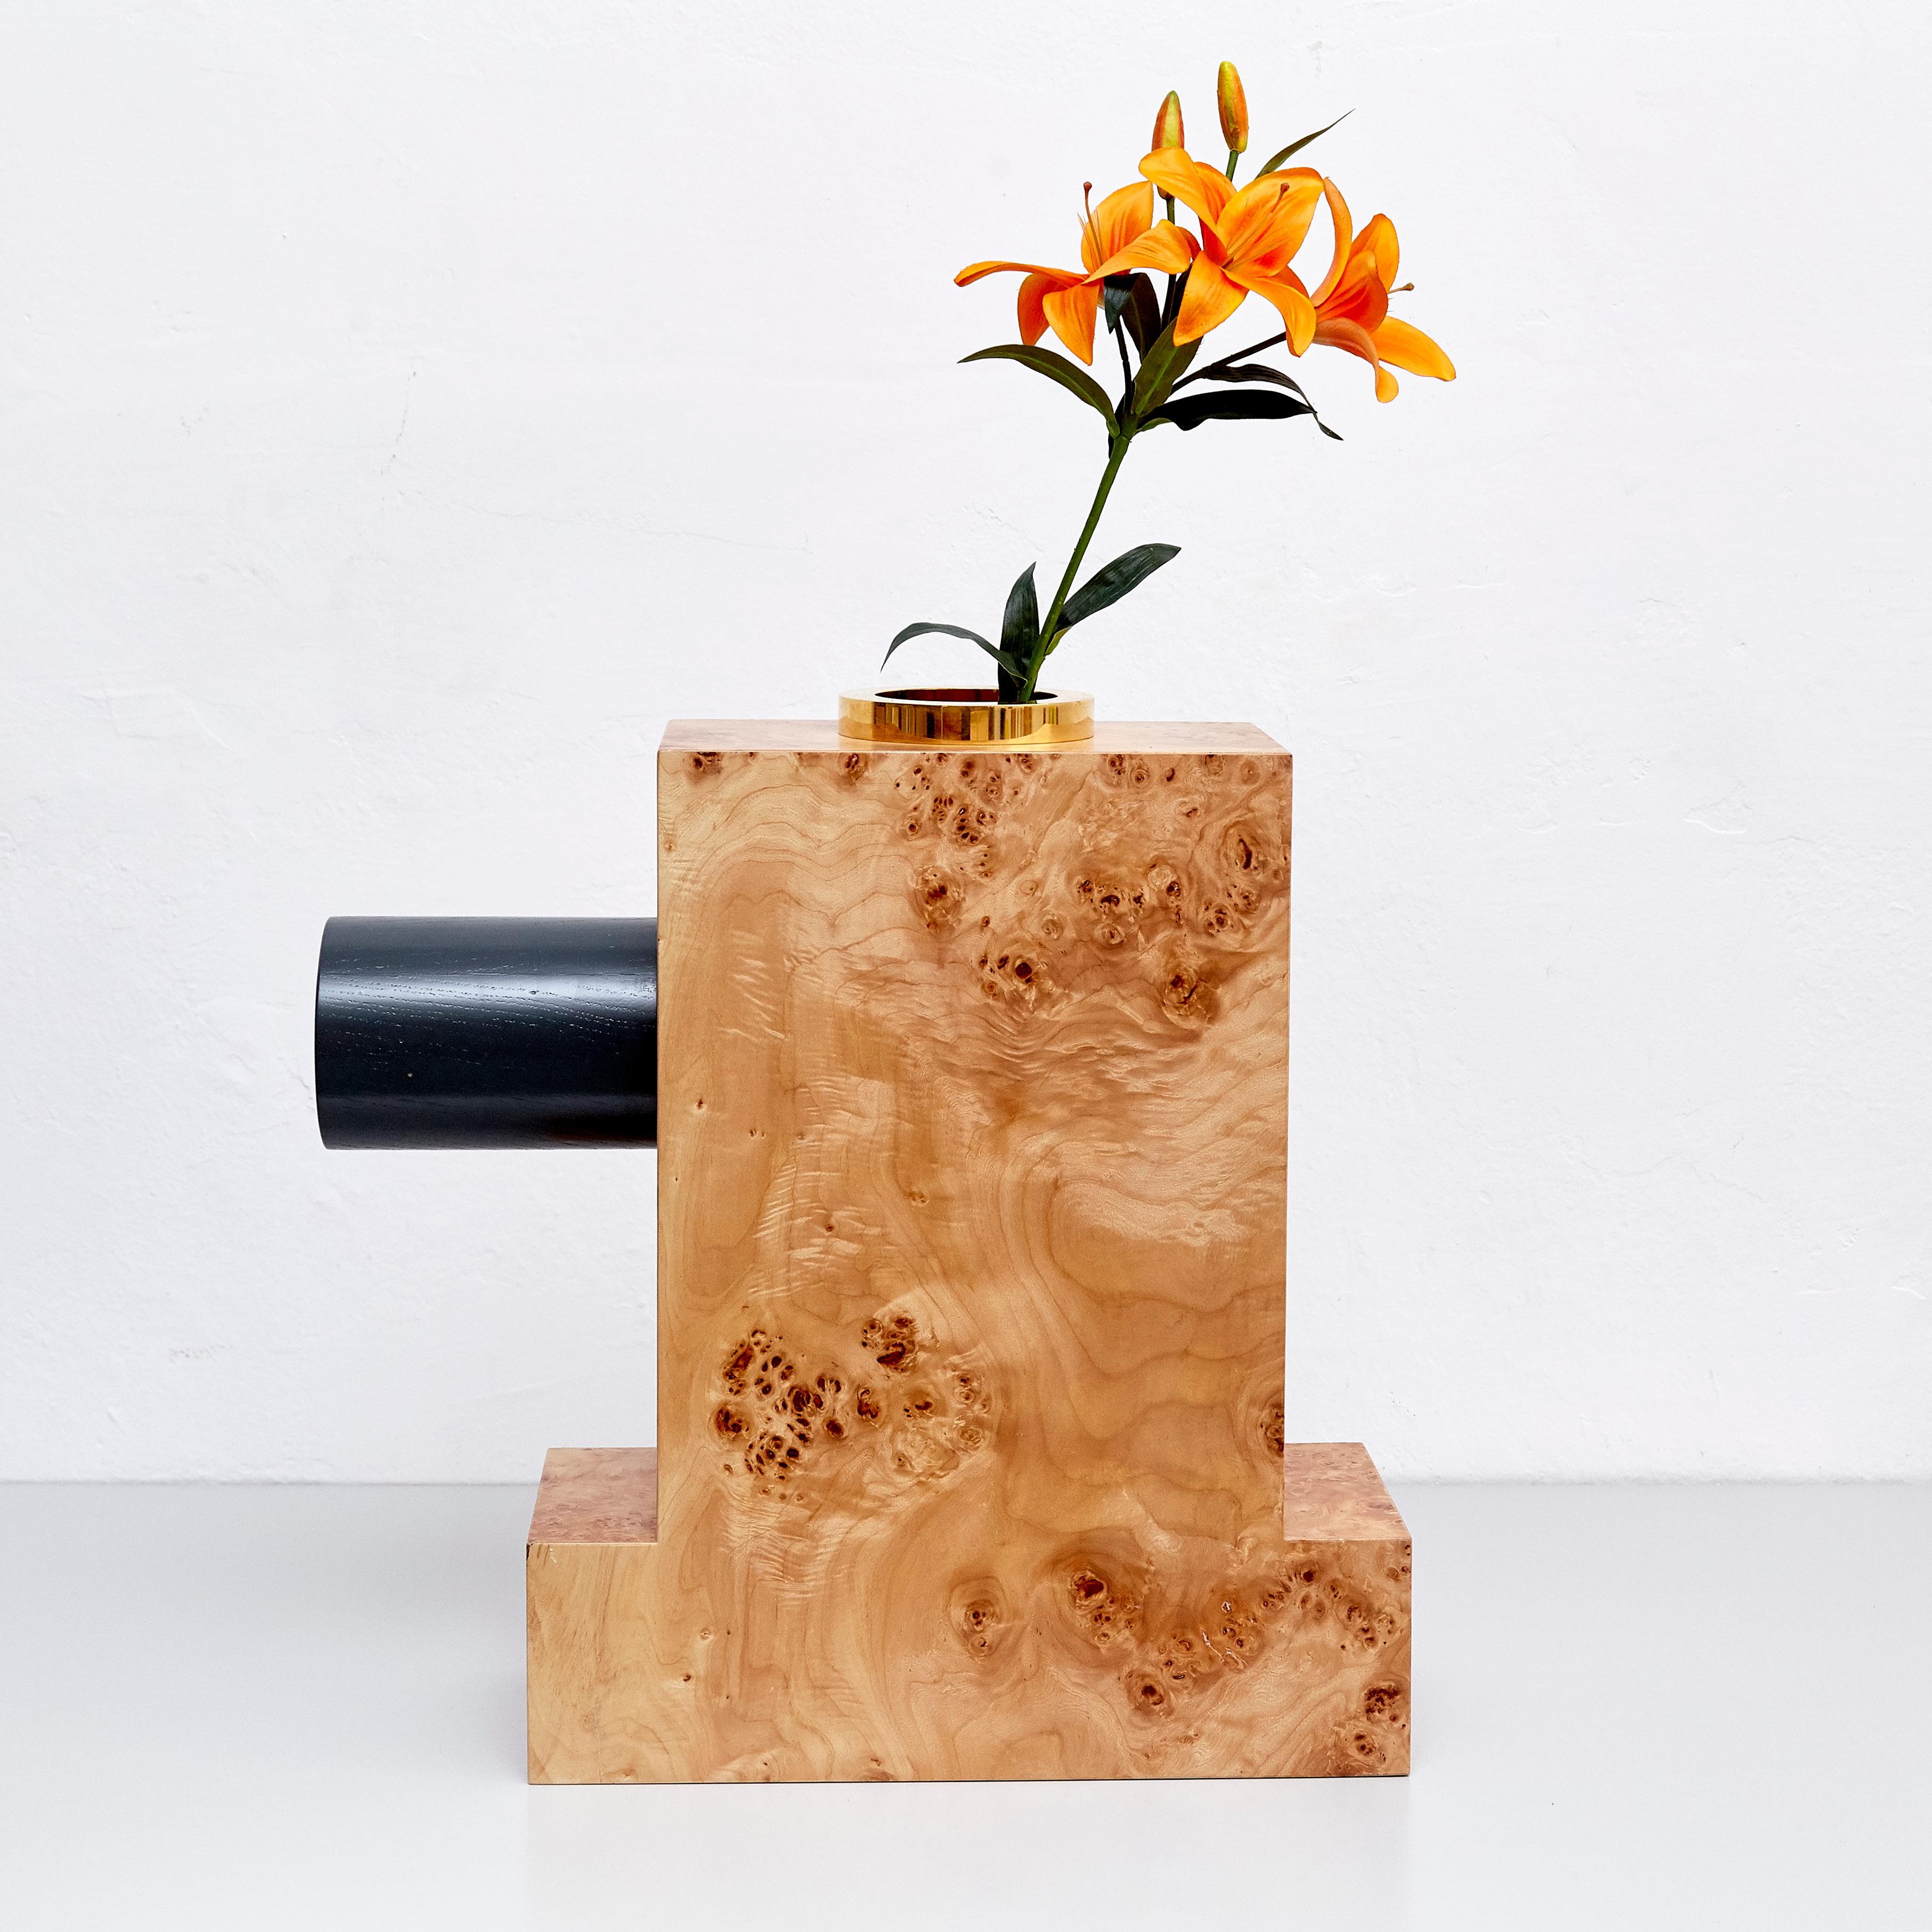 Twenty-seven woods for a Chinese artificial flower vase K by Ettore Sottsass,
edited by Design Gallery Milano, 1995.

Limited edition of 12 signed and numered pieces, number 3 / 12.
This piece has also been produced as a limited edition with a